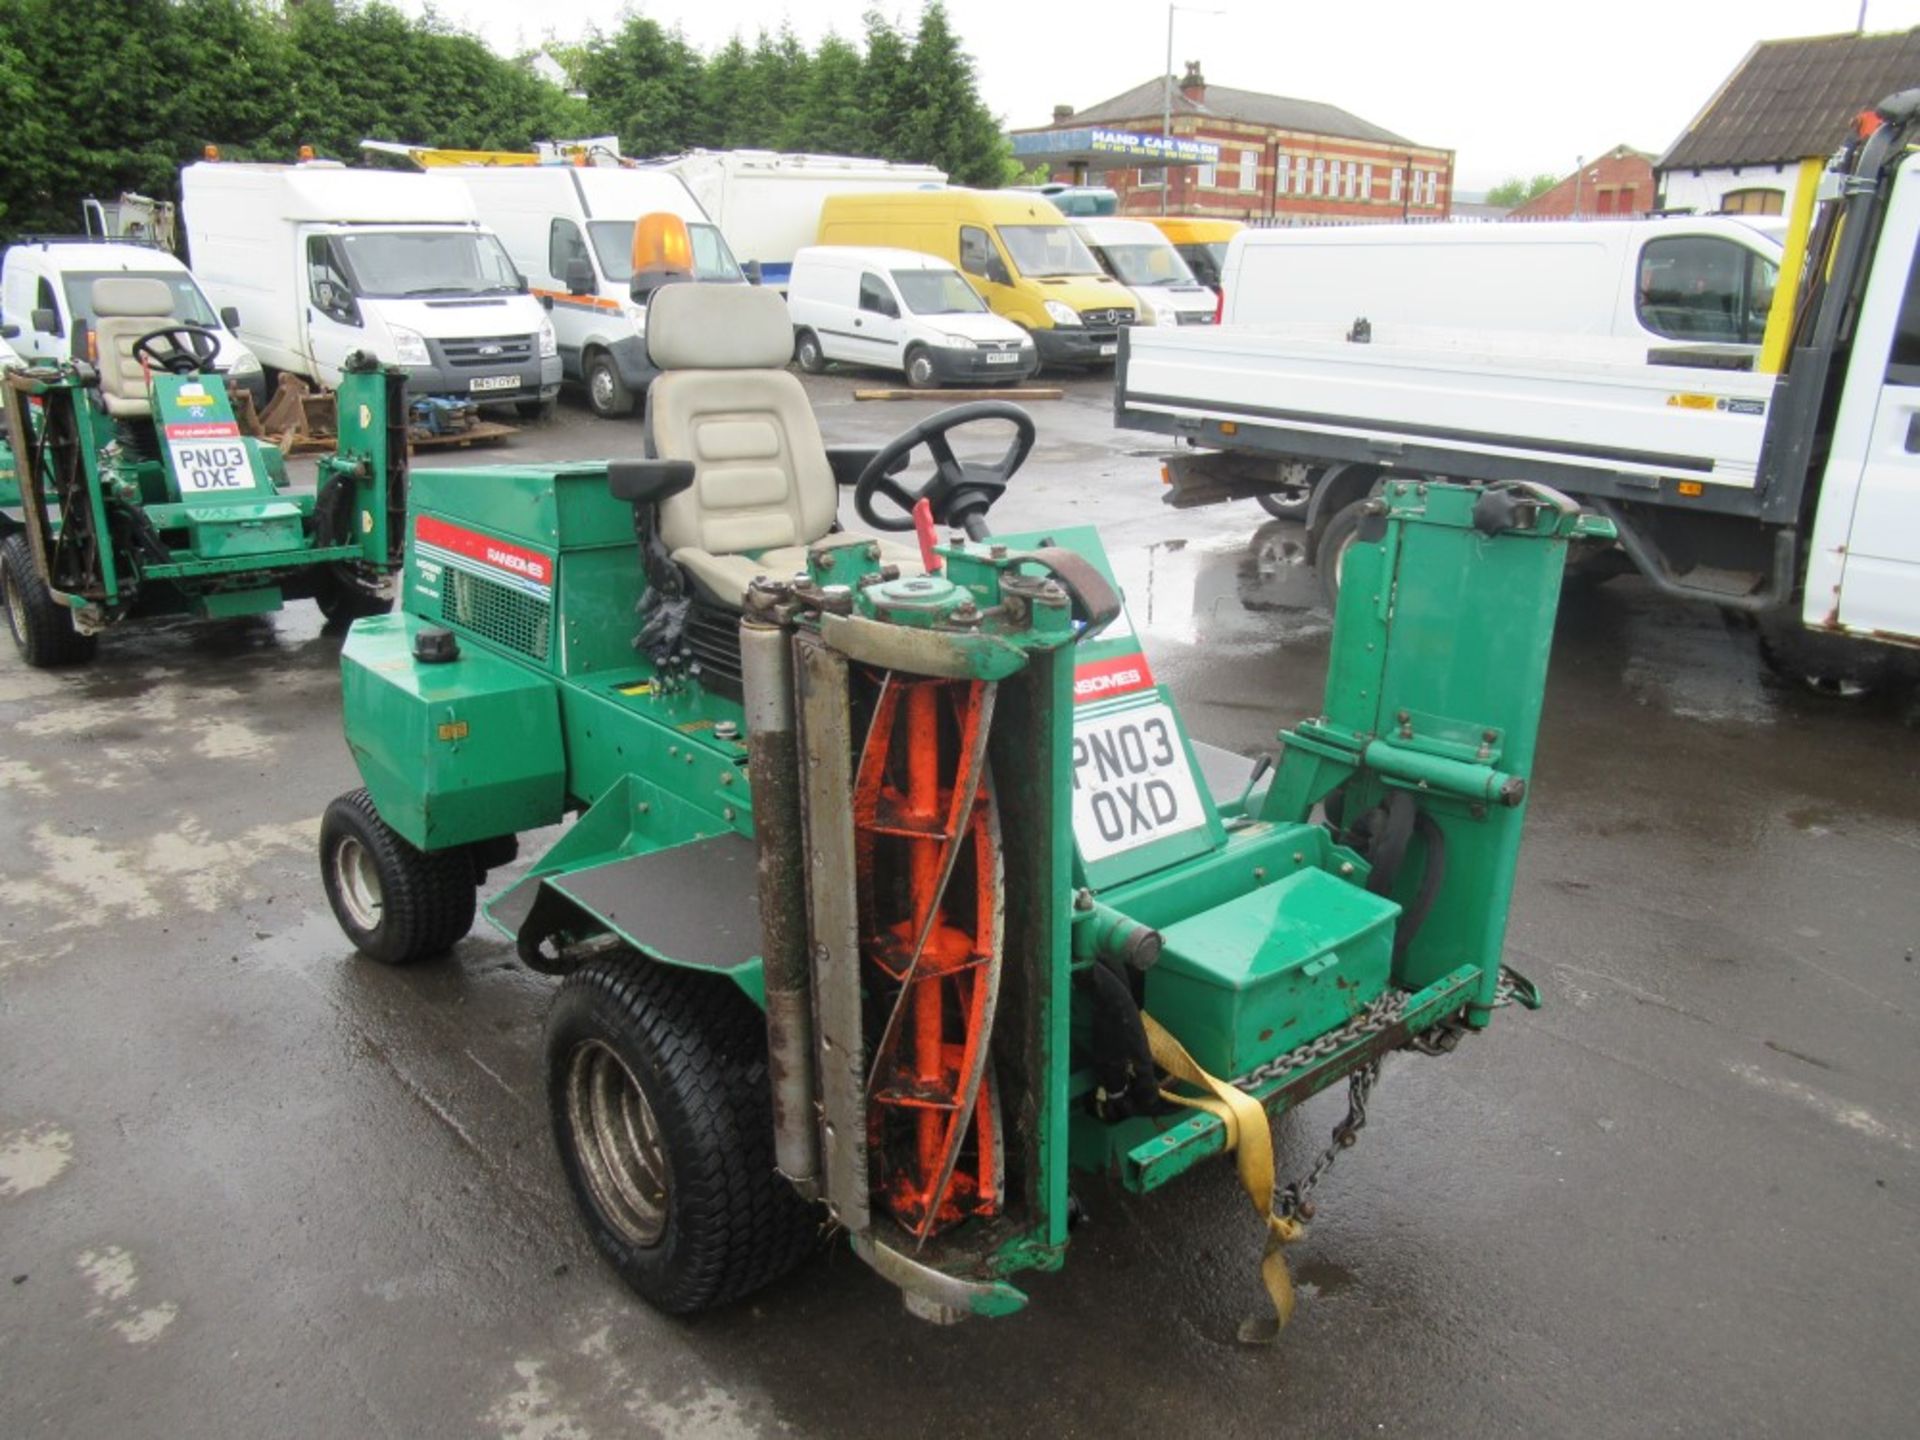 03 reg RANSOMES HIGHWAY 2130 RIDE ON MOWER (DIRECT COUNCIL) 2206 HOURS NOT WARRANTED, NO V5 [+ VAT] - Image 2 of 5